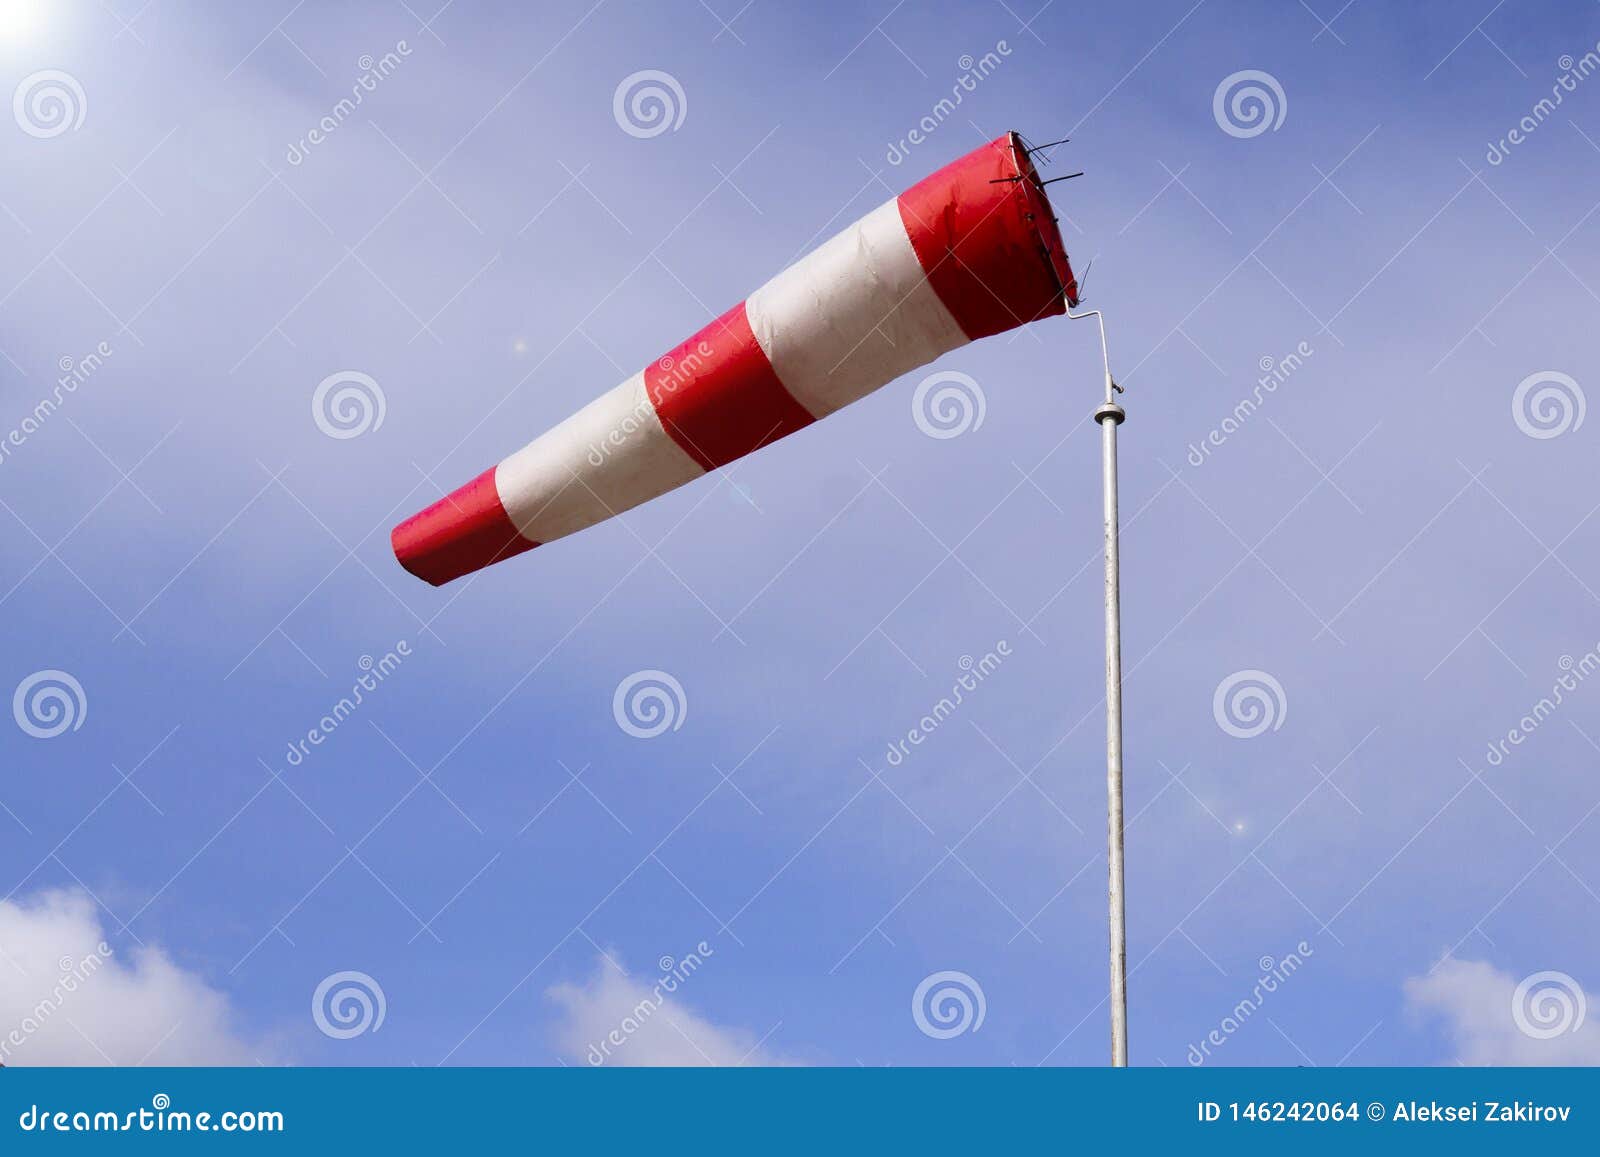 airport-windsock-clear-blue-sky-background-windy-weather-indicate-local-wind-direction-also-called-air-sock-drogue-146242064.jpg